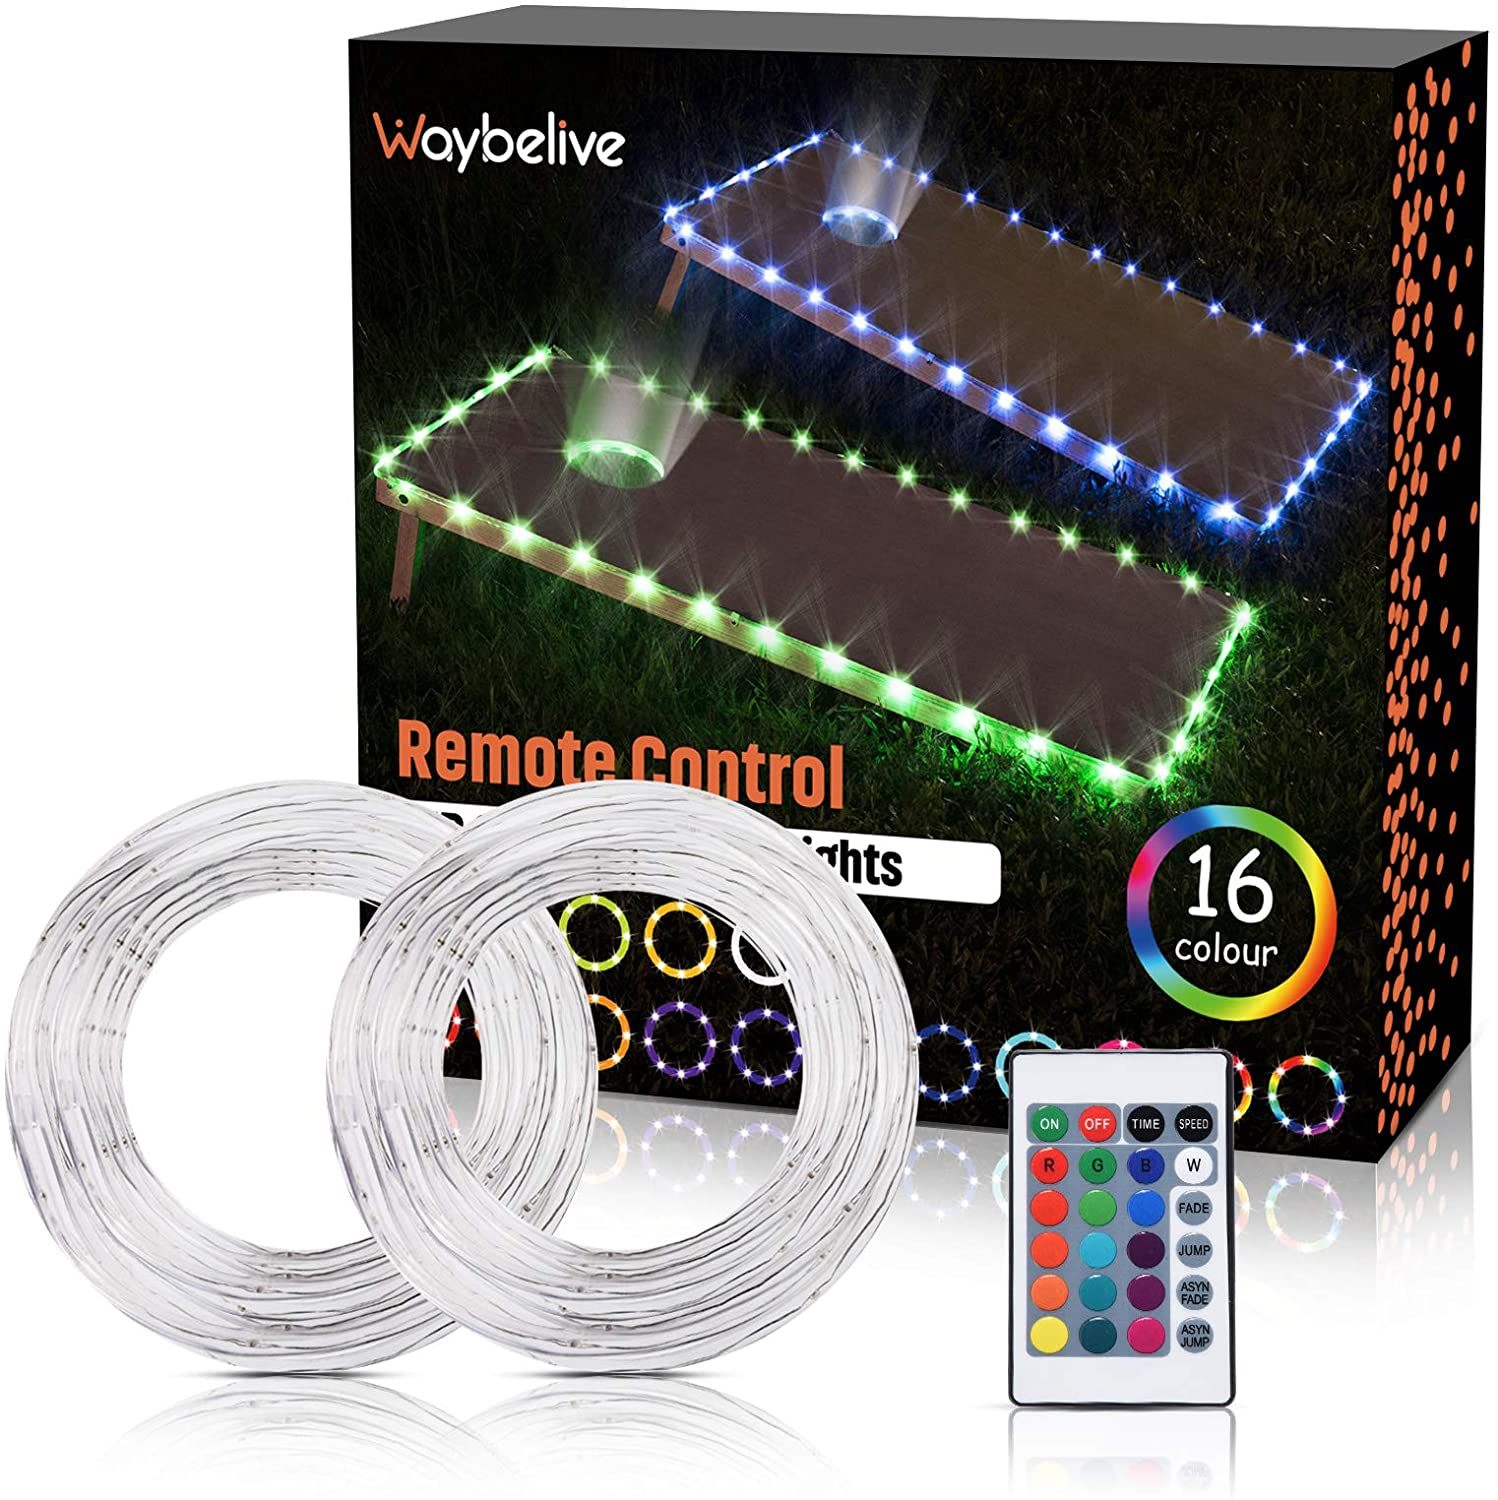 LED Cornhole Lights, Remote Control Cornhole Board Edge and Ring LED Lights, 16Color change by yourself, a great addition for playing Bean Bag Toss Cornhole game at the family backyard at night